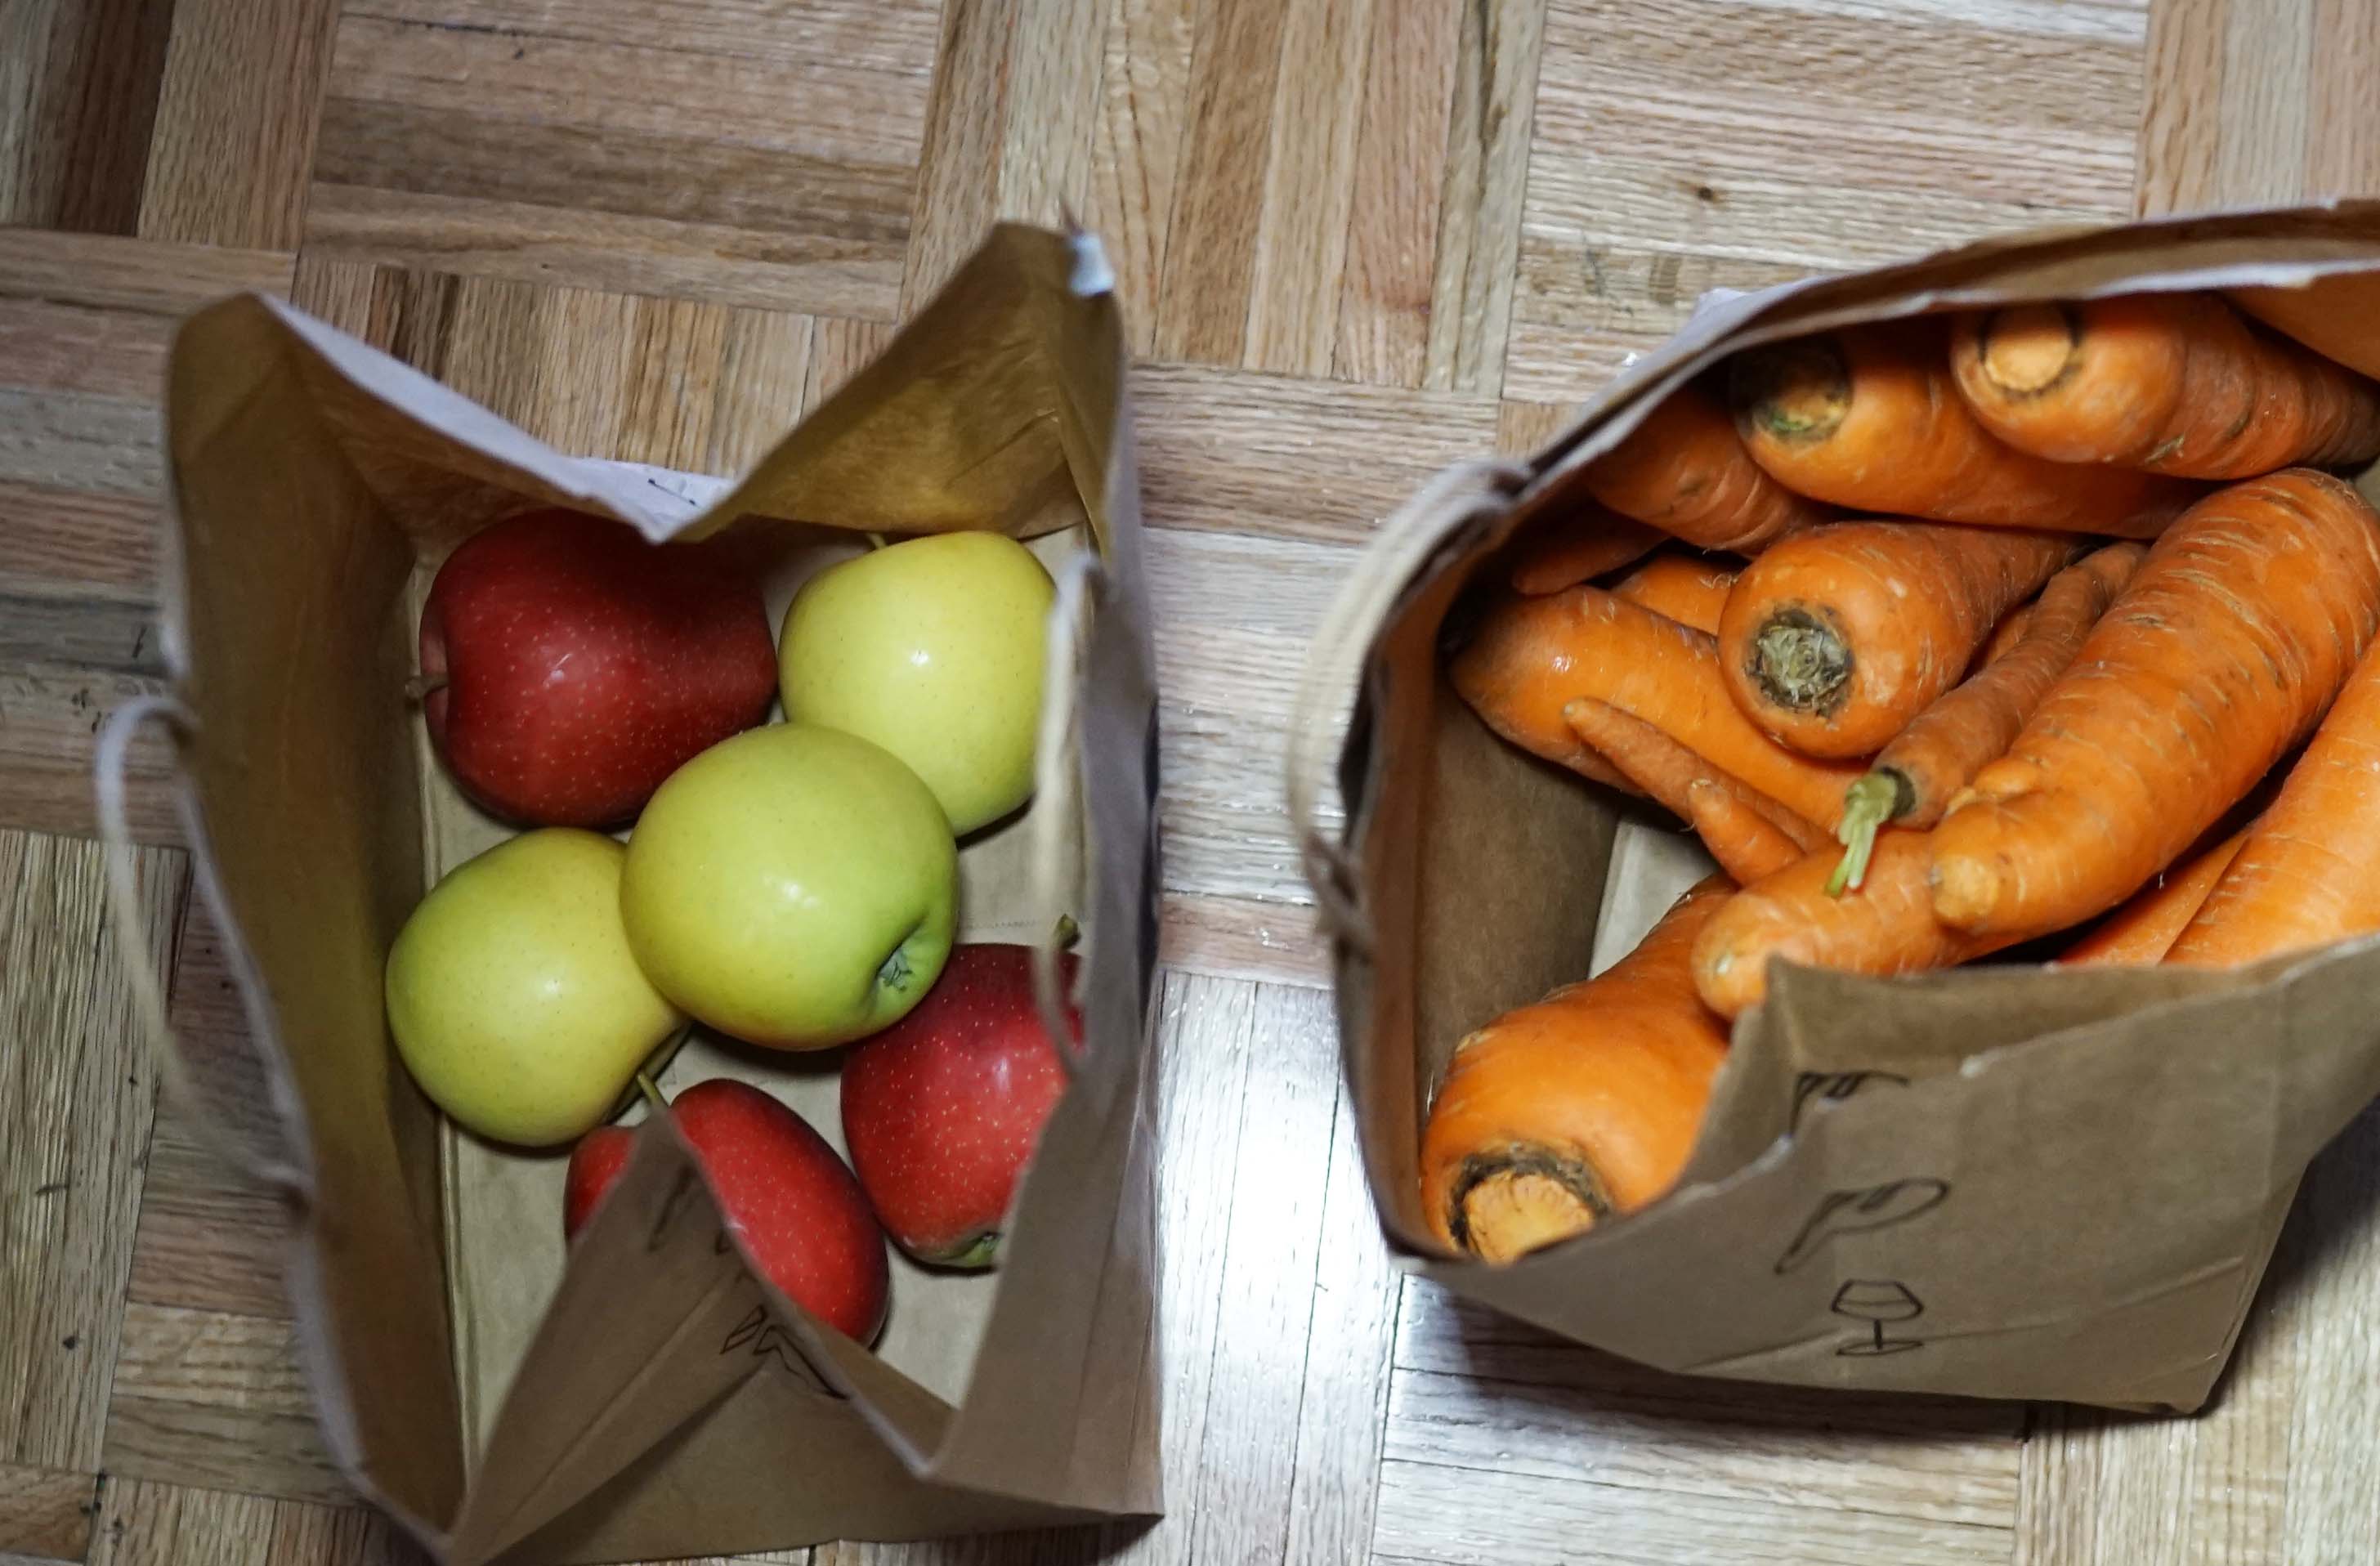 Le District apples and carrots in bag